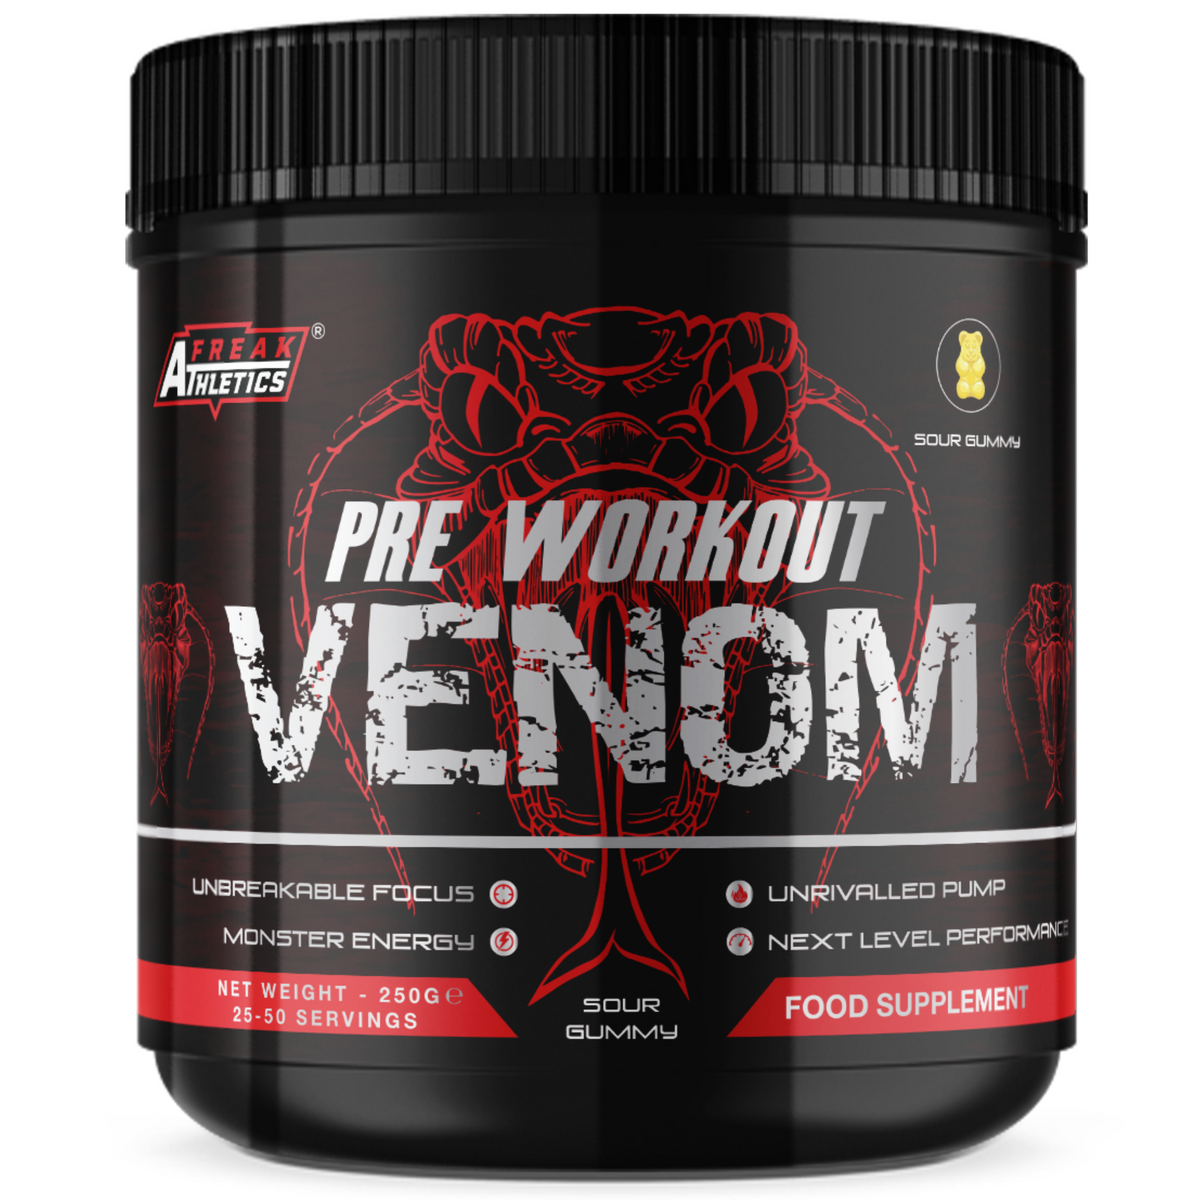 10 Minute Venom pre workout review for Weight Loss